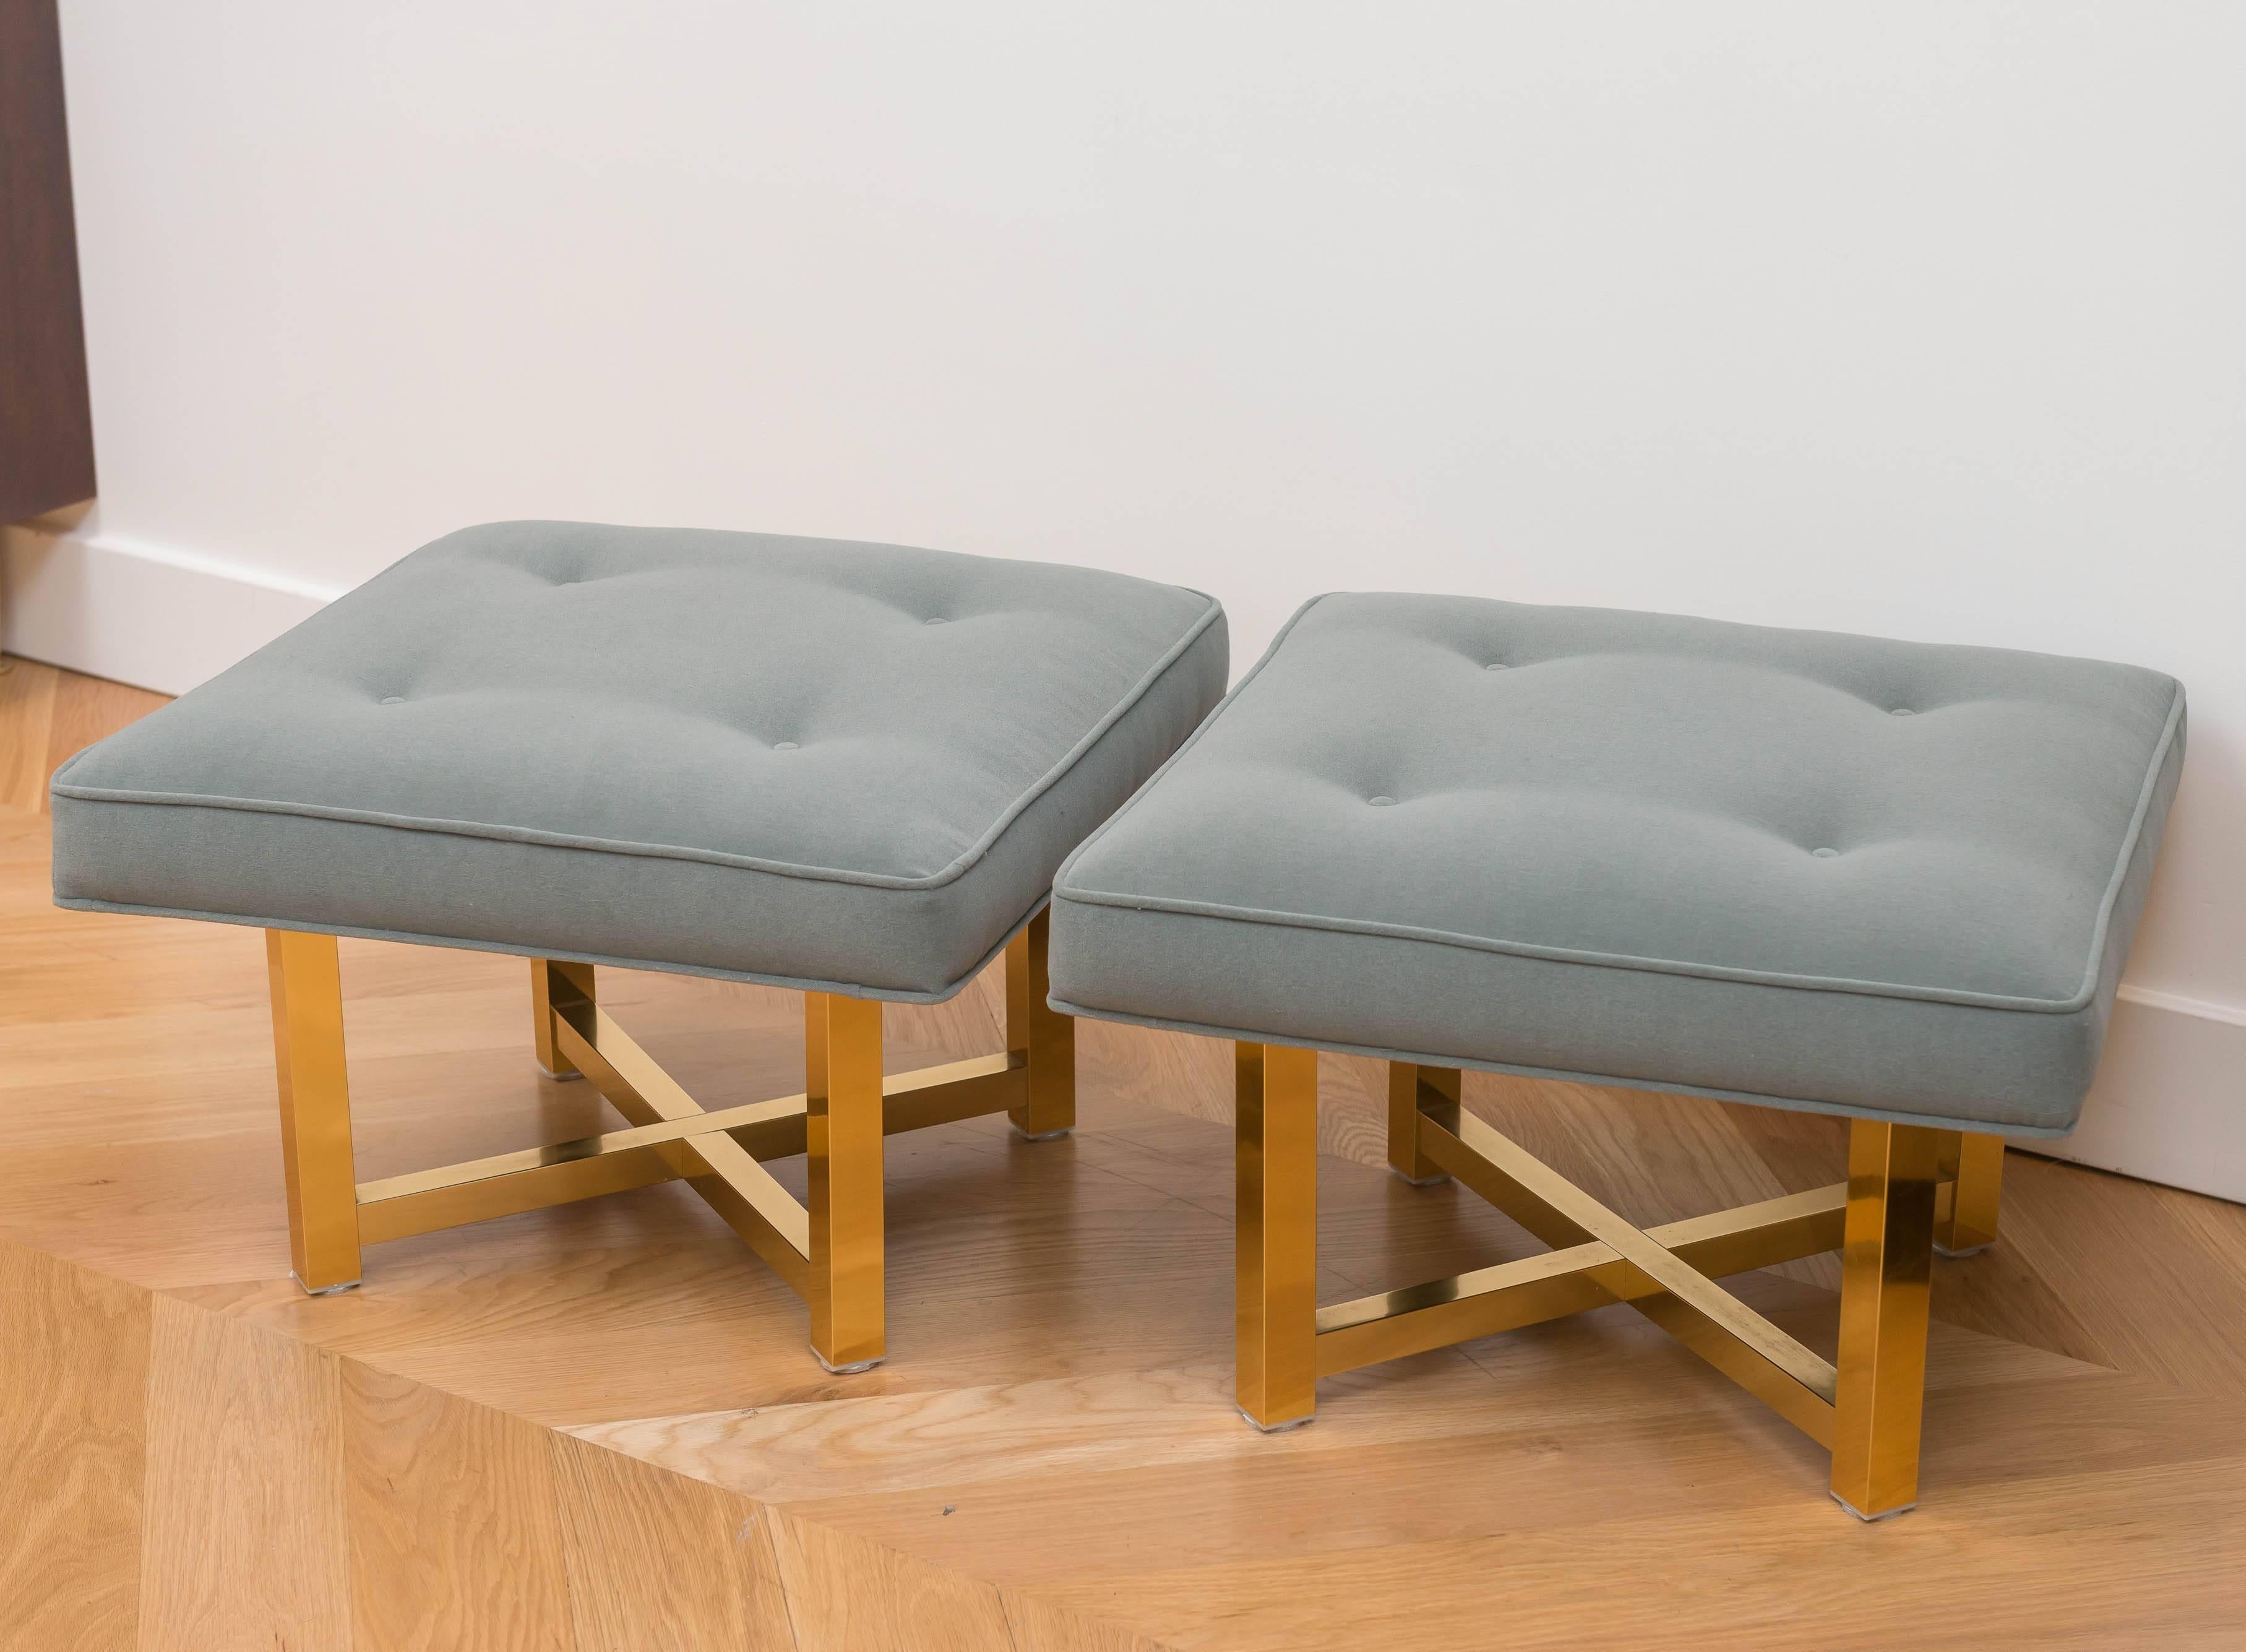 Chis pair of 80's low ottoman with brass plated bases.
New alpaca wool fabric